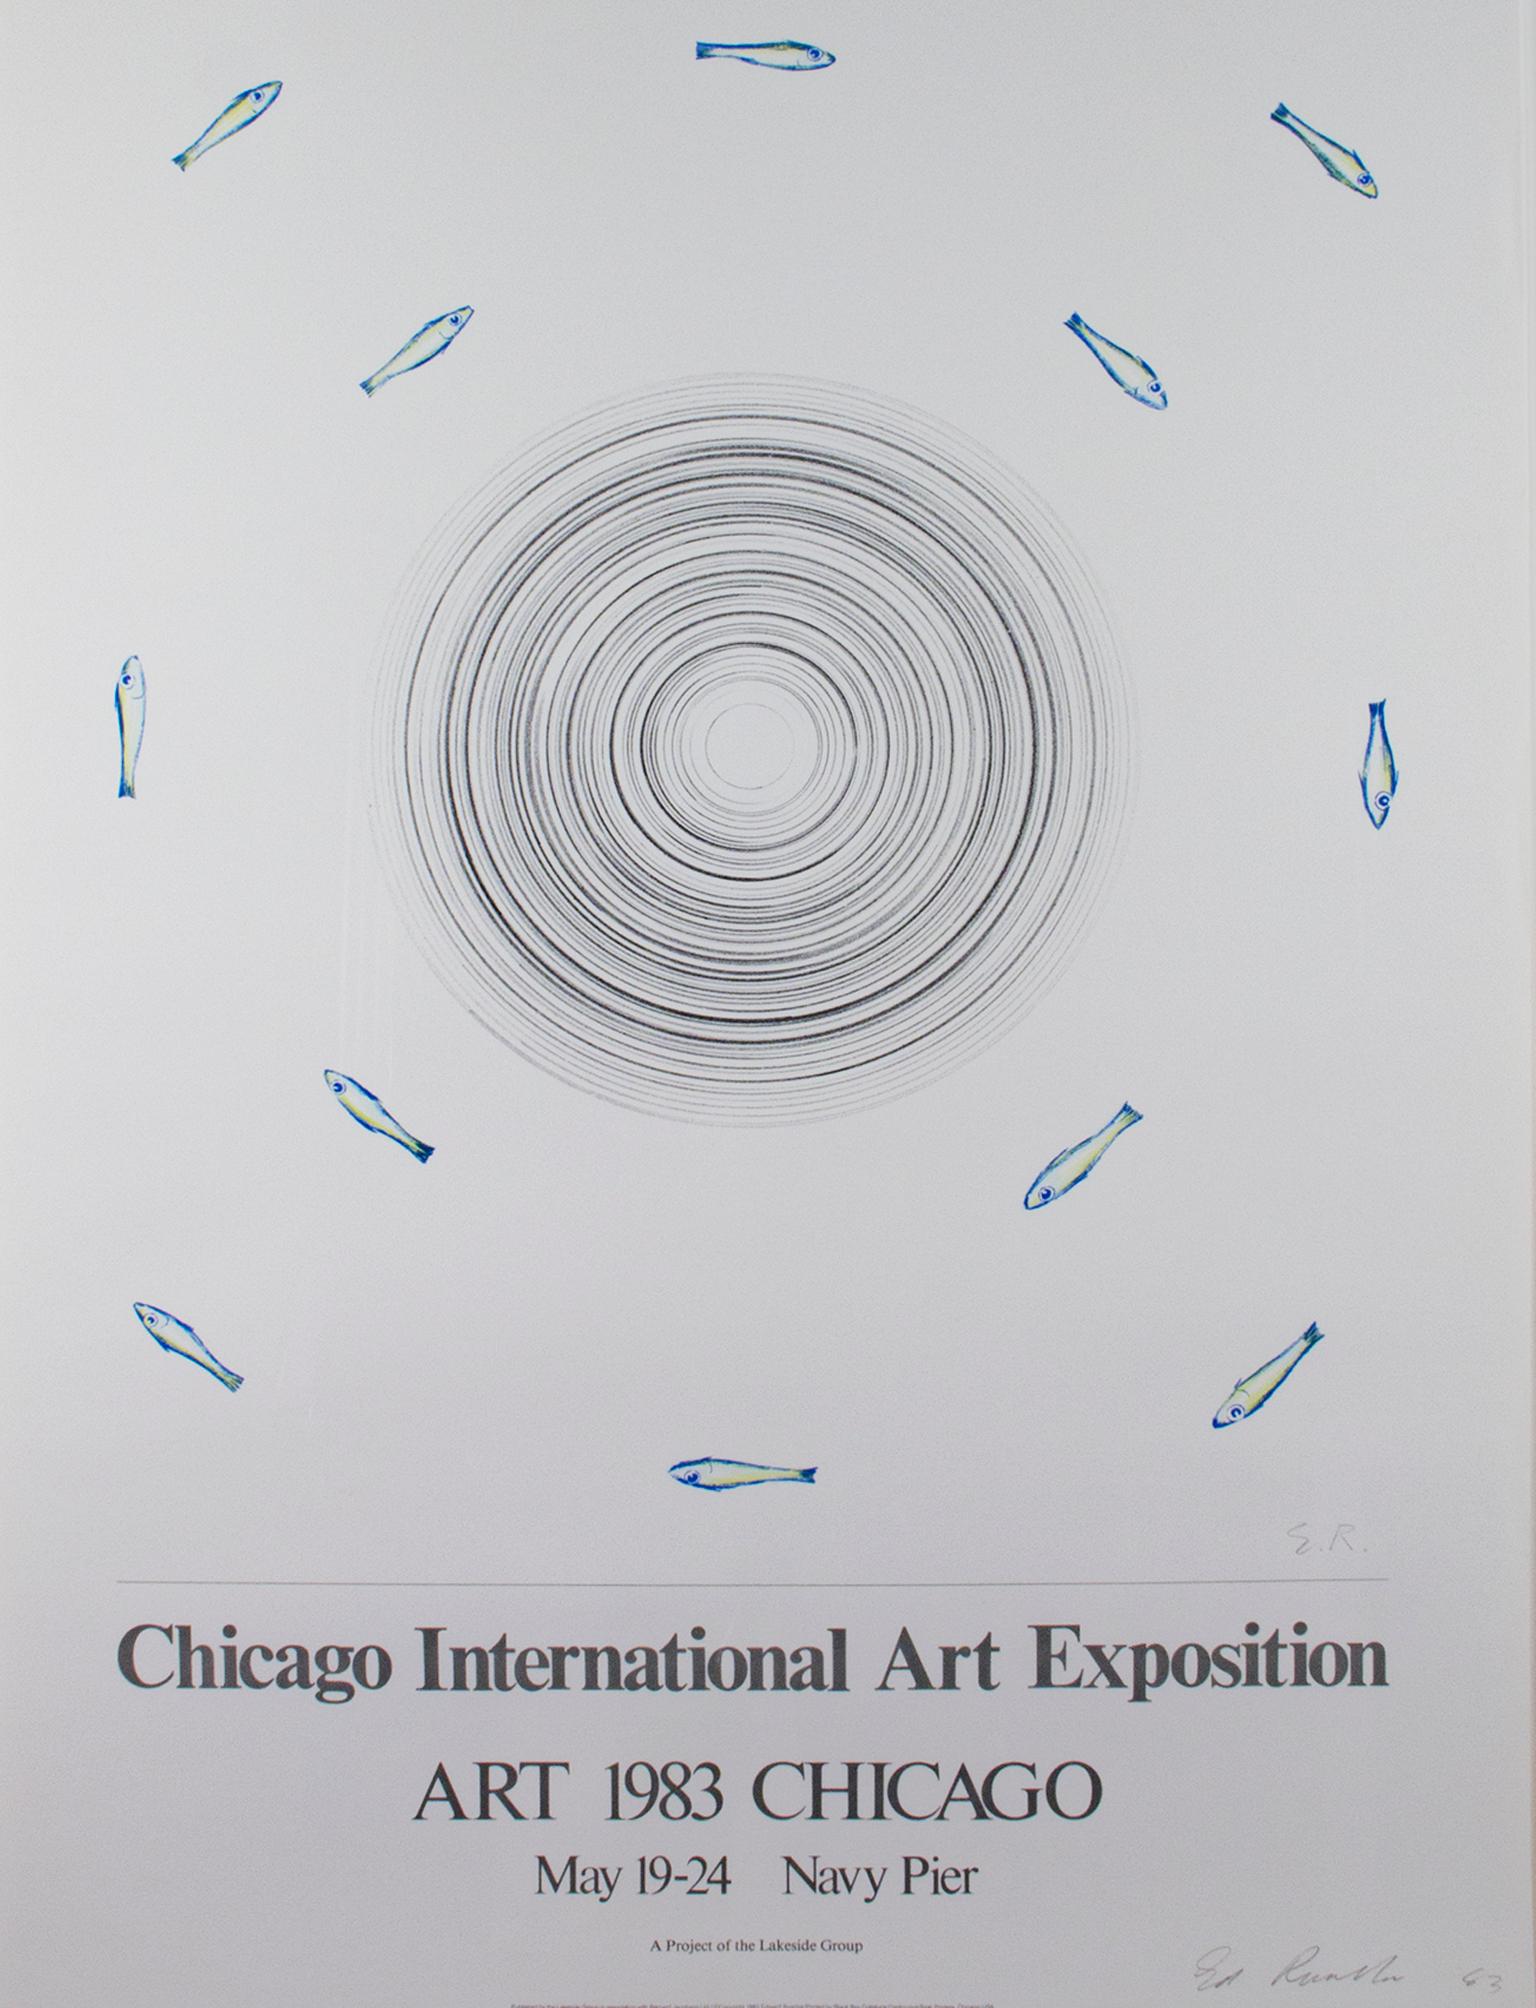 (After) Ed Ruscha Abstract Print - "Chicago International Art Exhibition, " Abstract Exhibition Poster 